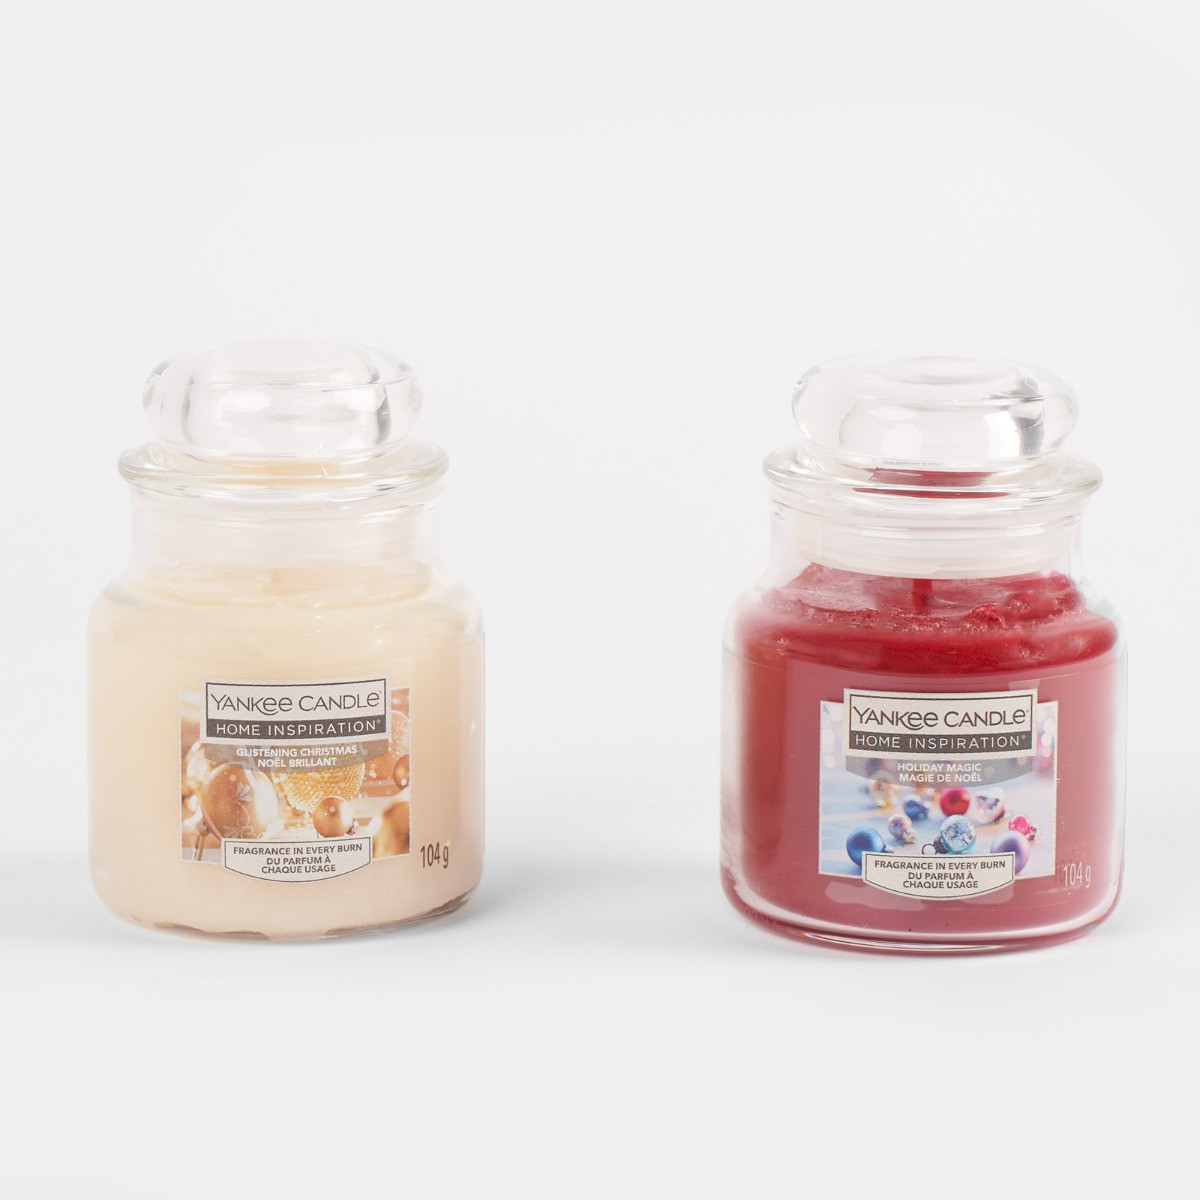 Yankee Candle Home Inspiration 2 Small Jar Candle Gift Set